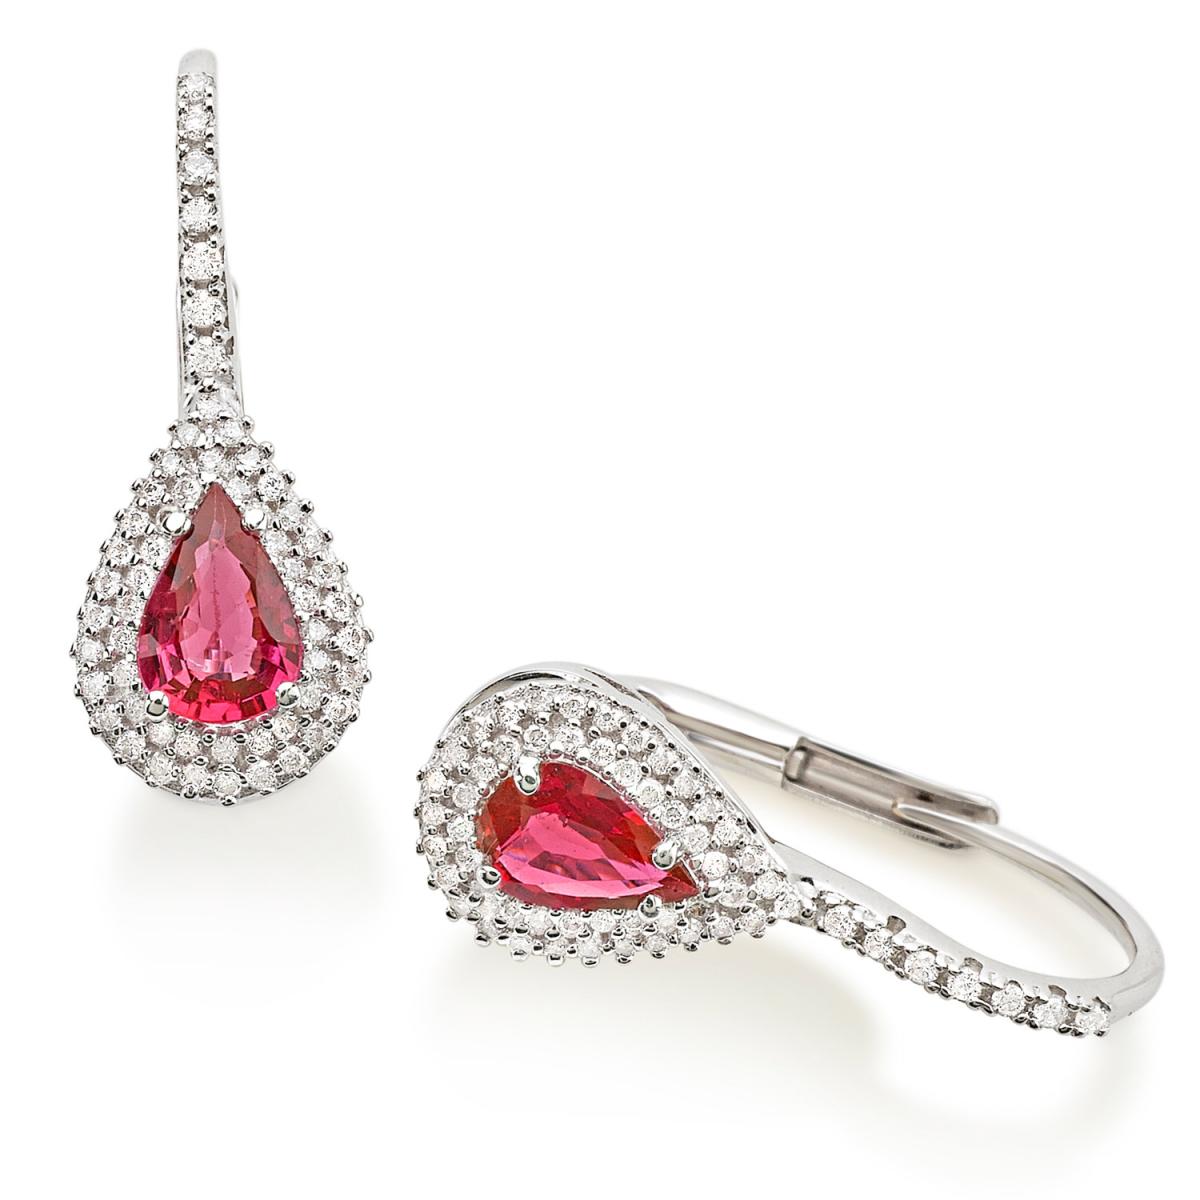 Hook earrings in 18kt white gold with diamonds and central precious stones - OD325